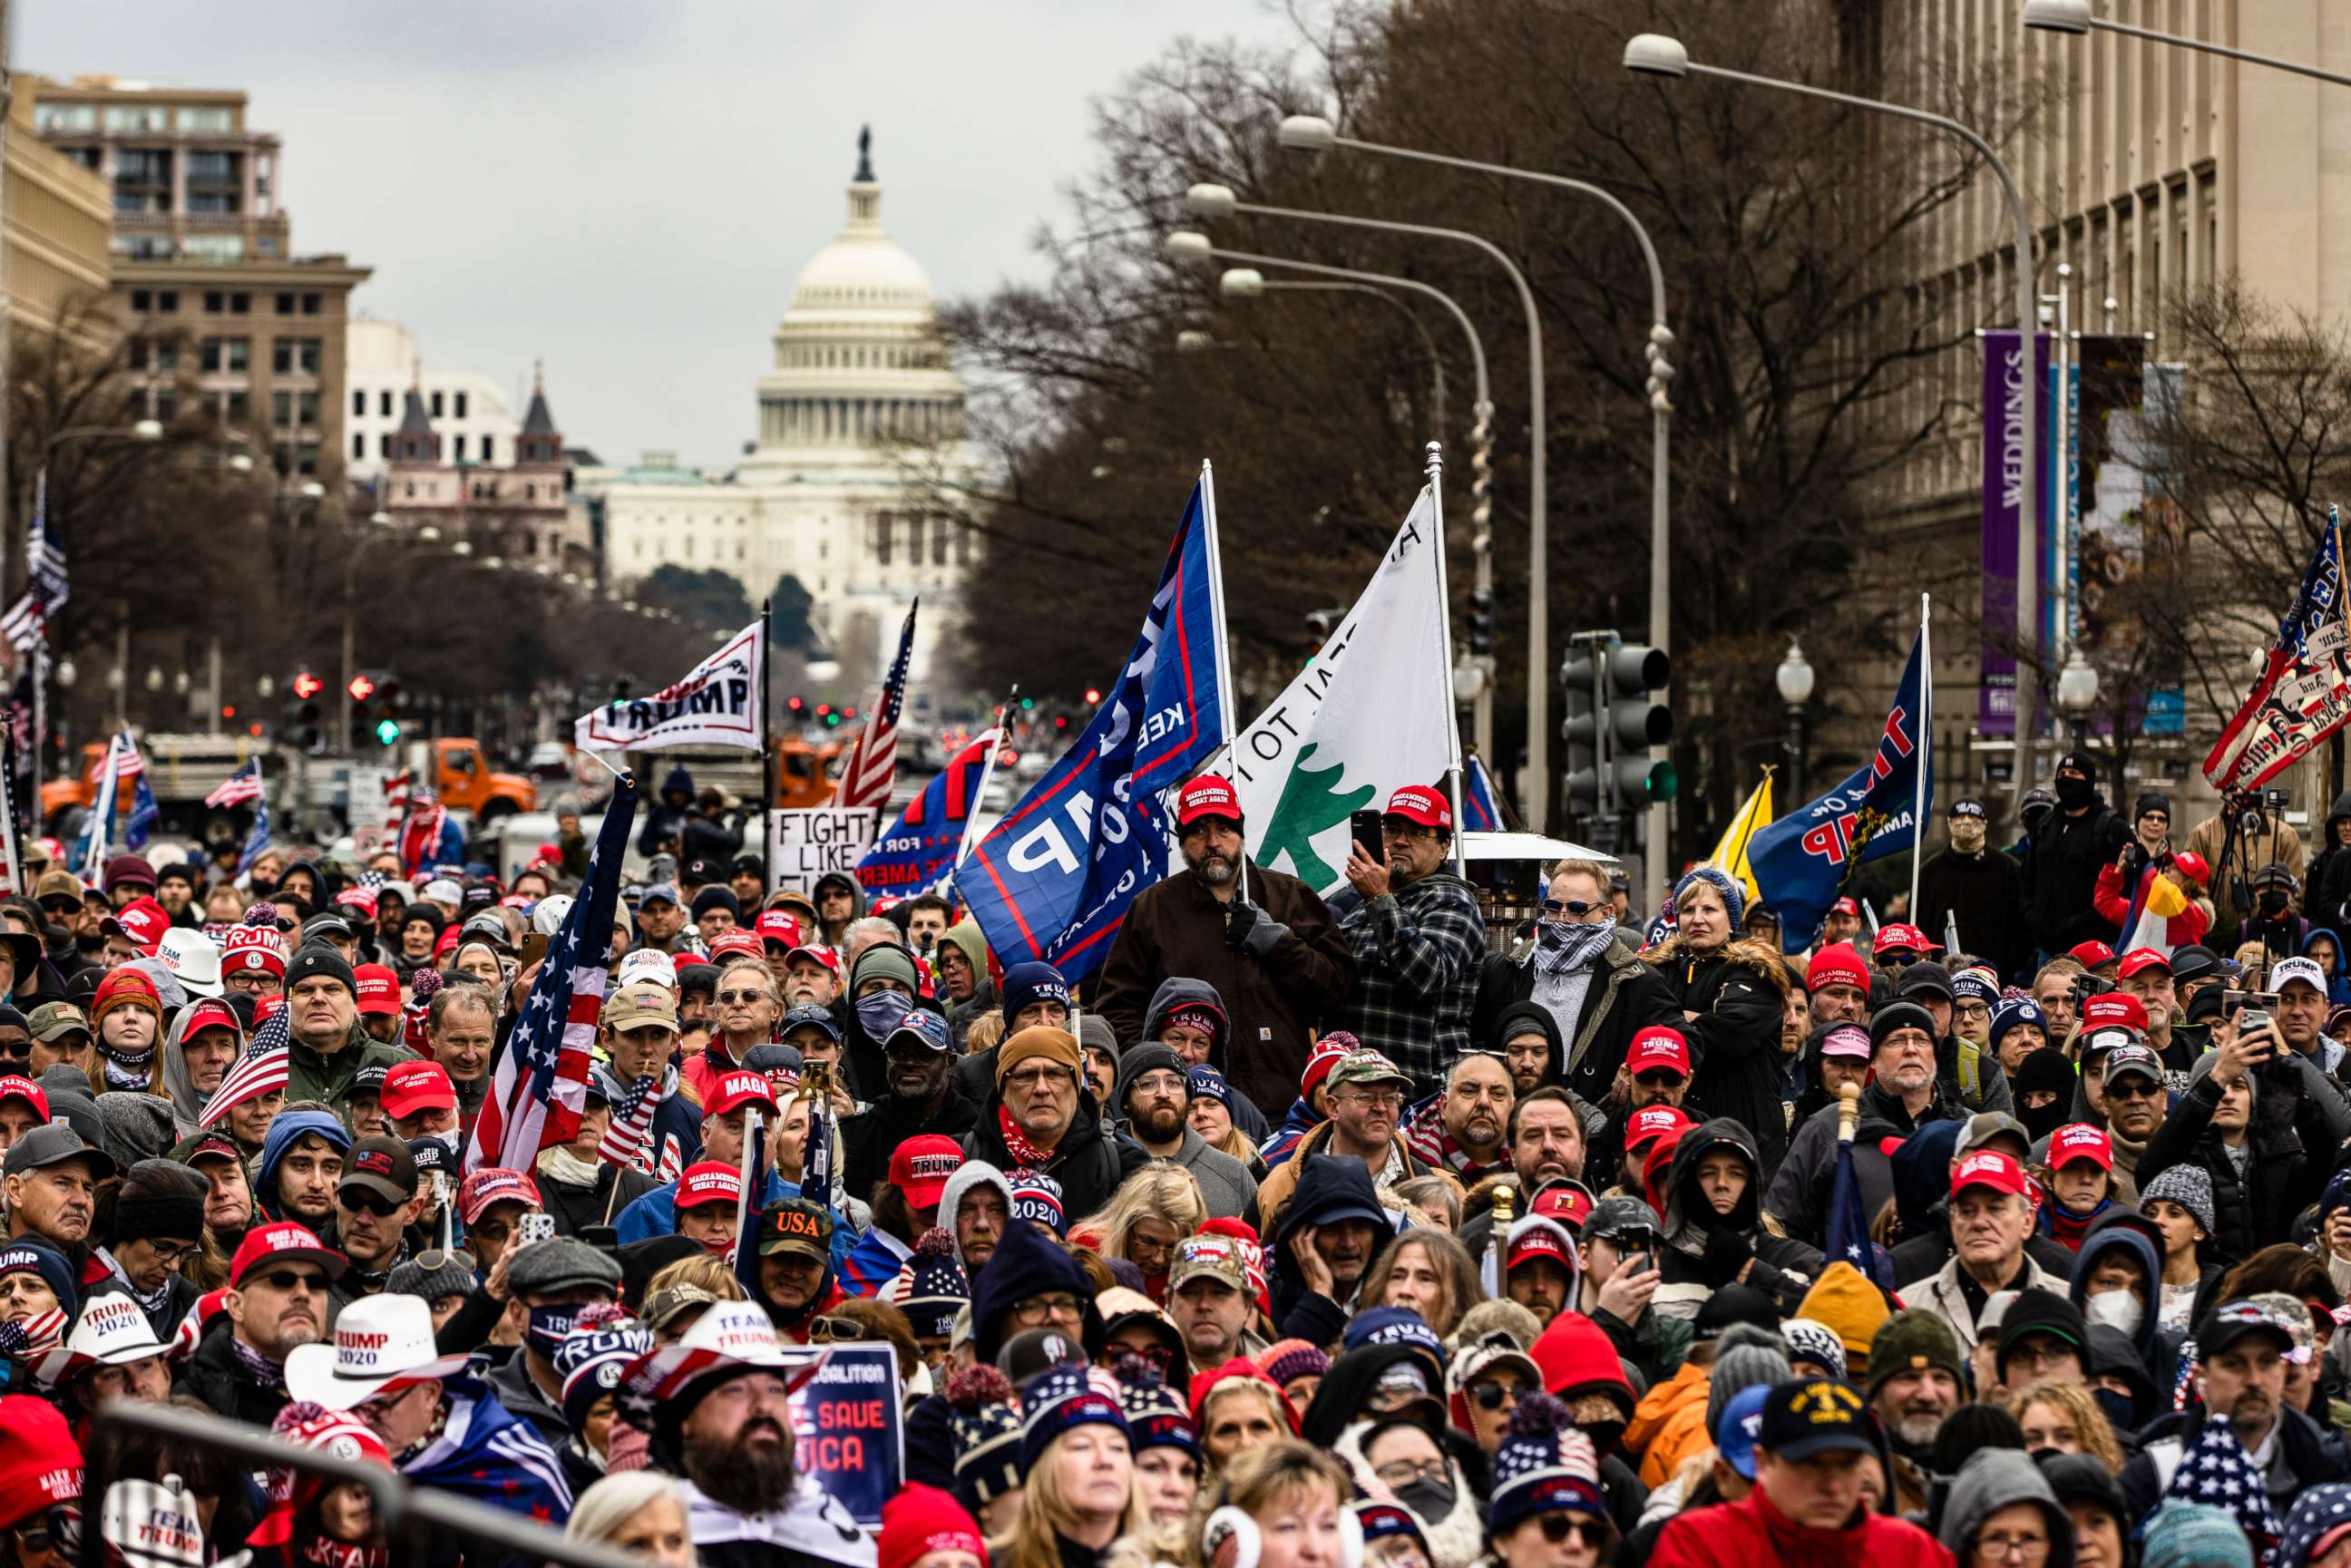 PHOTO: Supporters of President Donald Trump gather in Freedom Plaza for a rally on Jan. 5, 2021, in Washington, D.C.